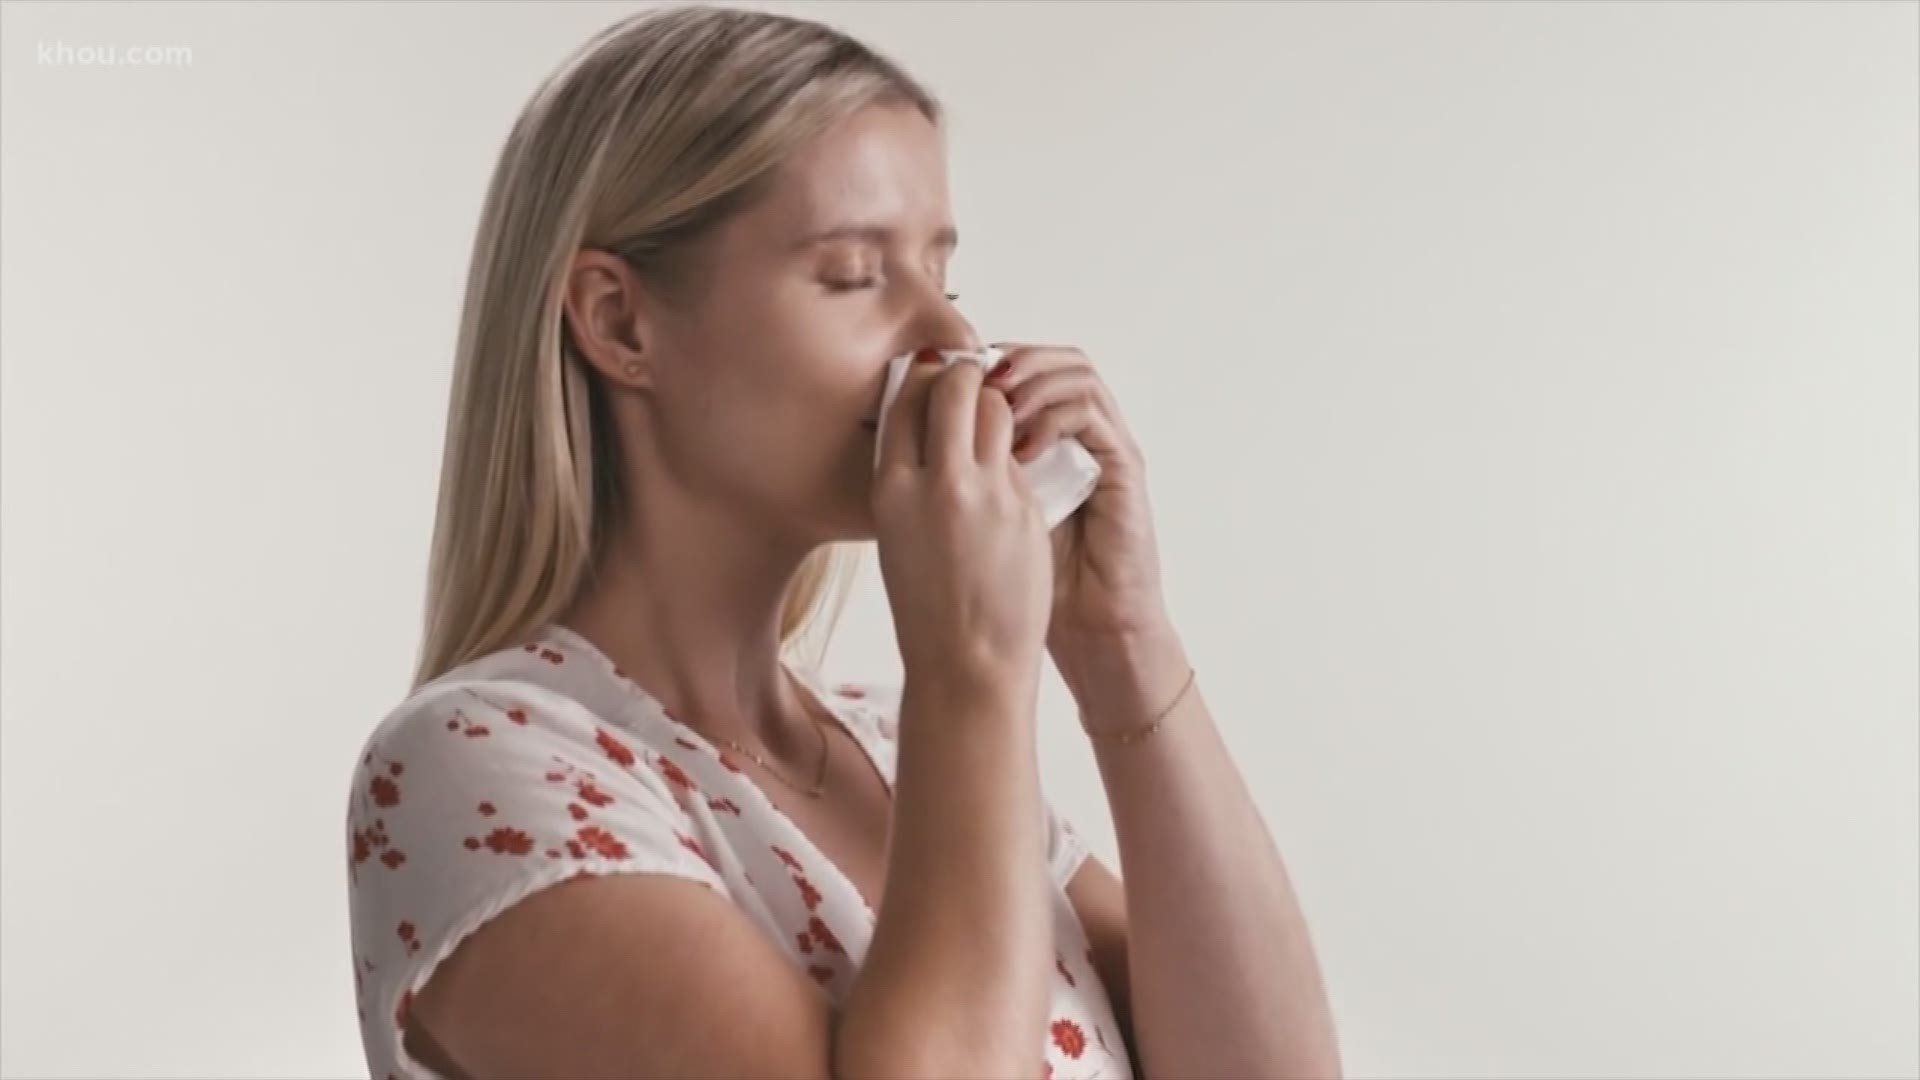 A startup company wants to sell you used tissues that people with colds have already sneezed in. The idea is to make yourself sick on purpose so you can get a cold out the way and boost your immune system before an upcoming event, like a vacation.